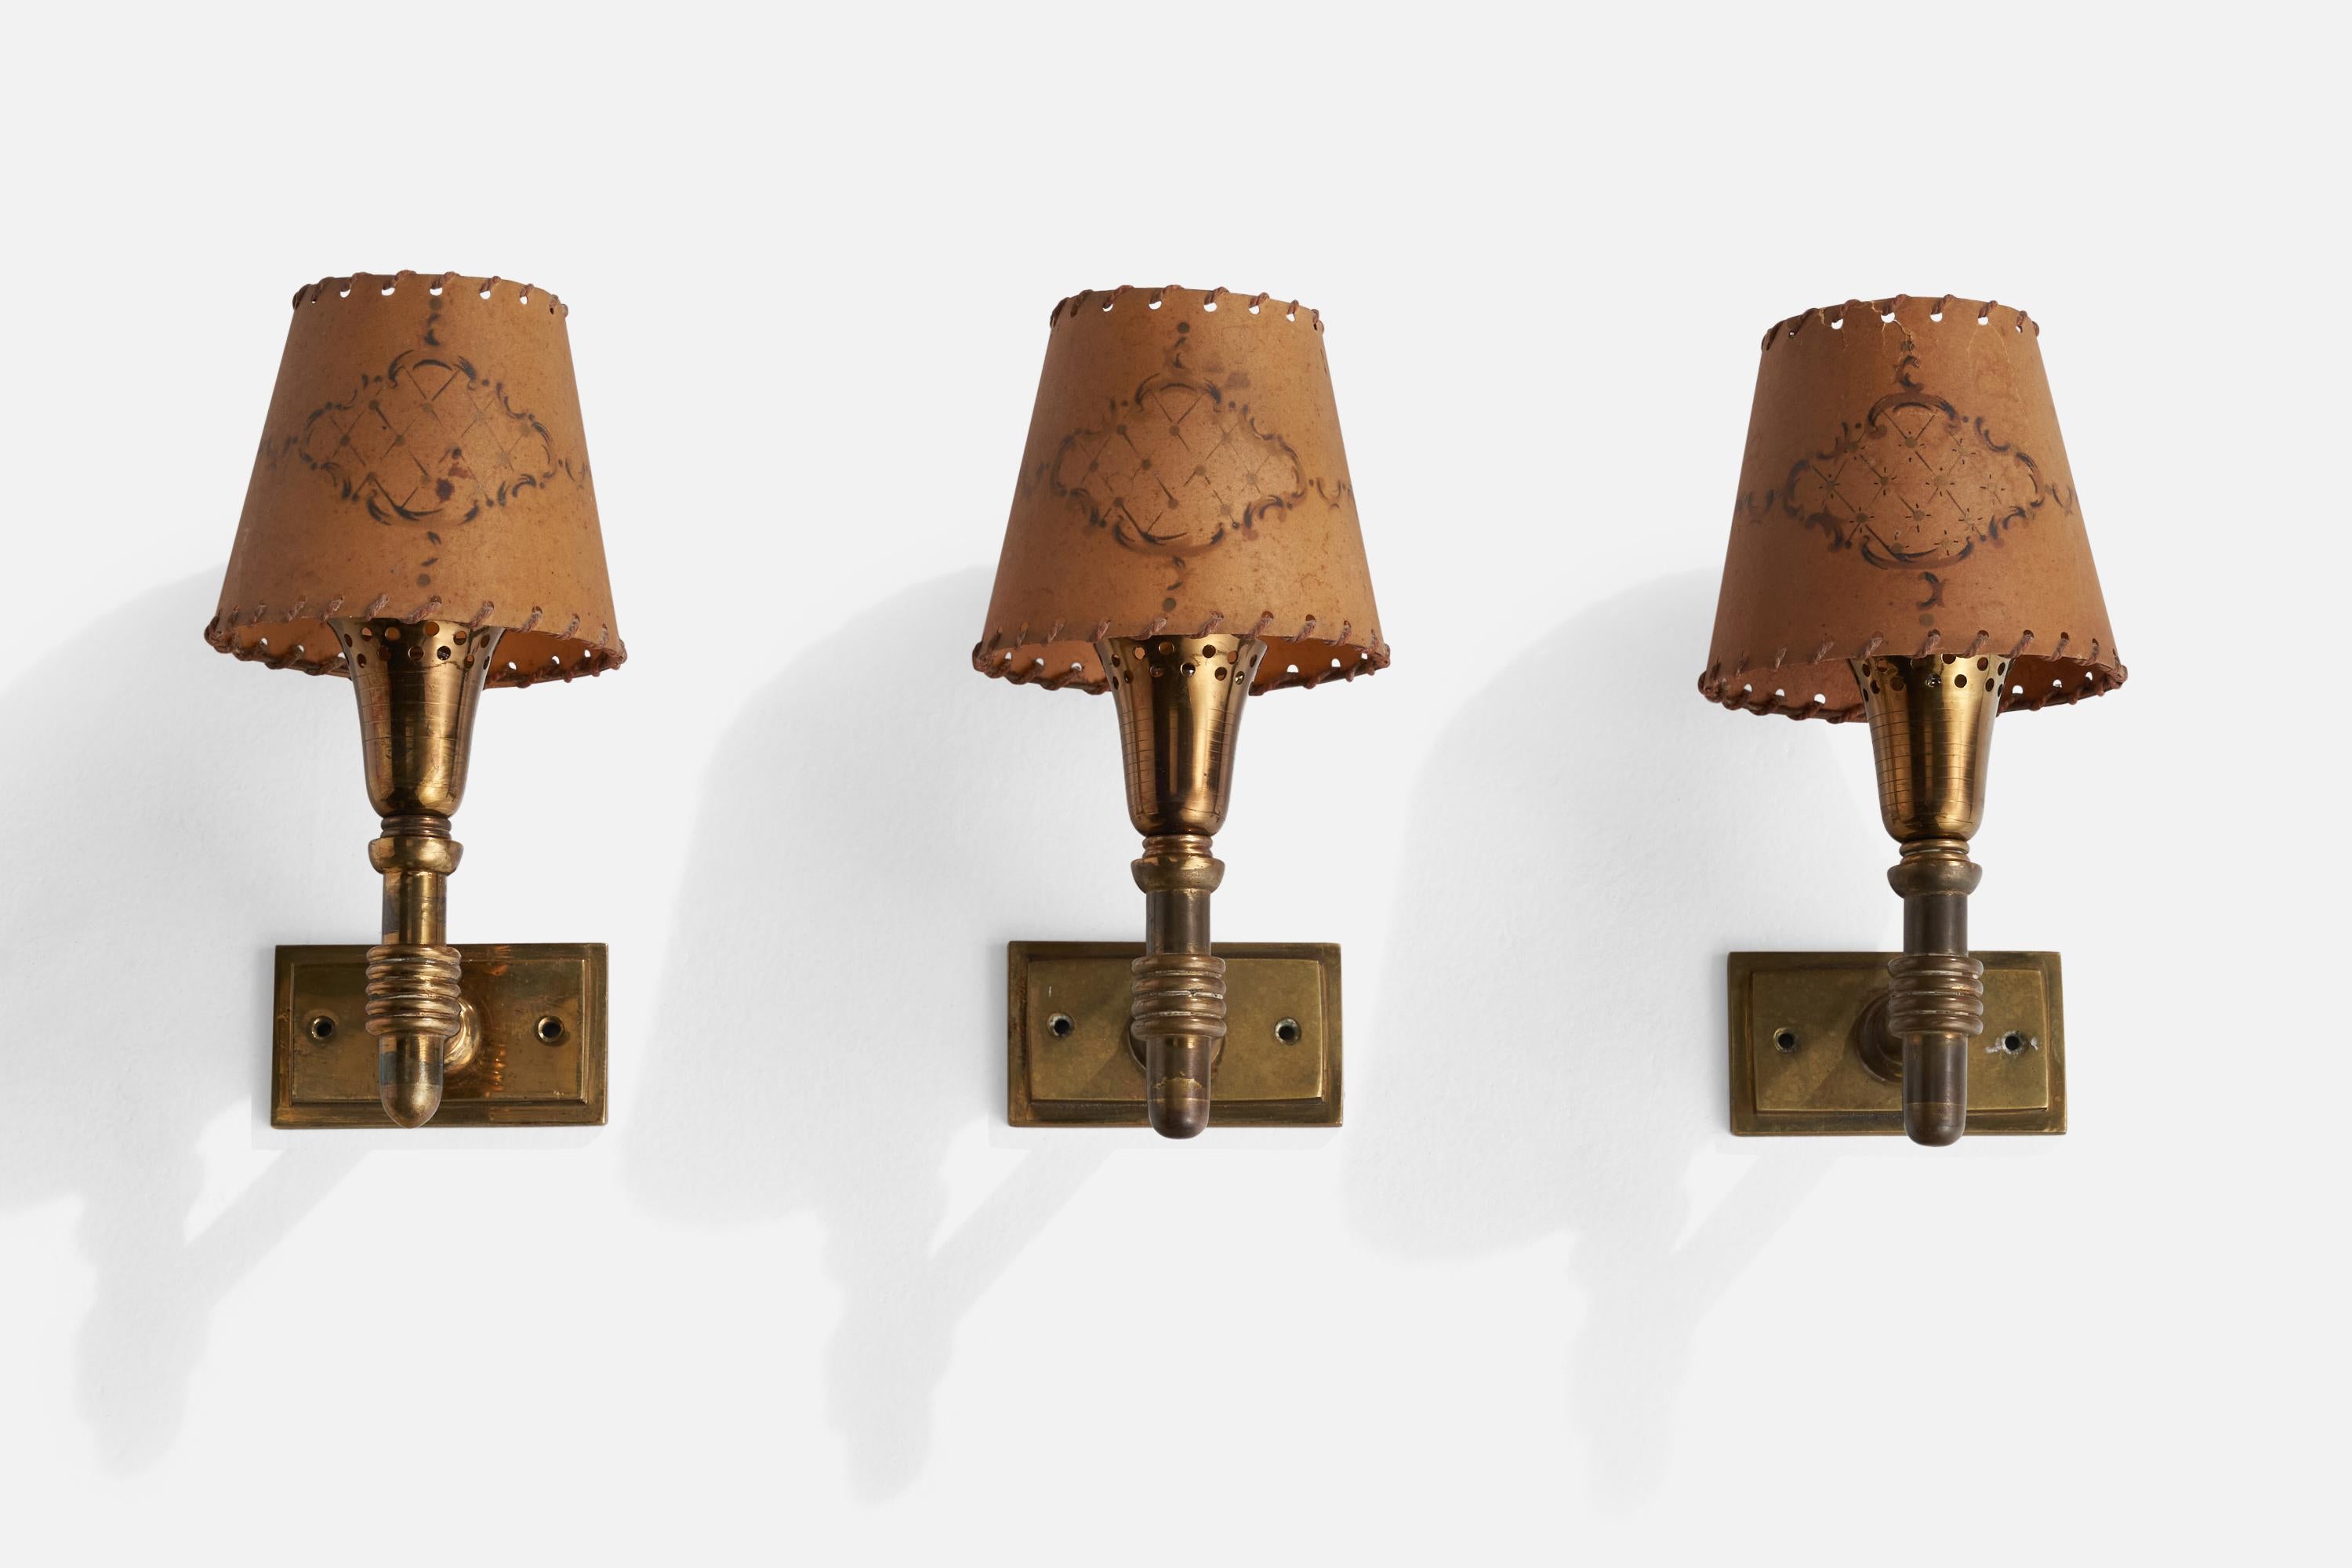 A set of 3 brass and beige parchment paper wall lights designed and produced in Italy, 1930s.

Overall Dimensions (inches): 4.75” H x 3.5” W x 5” D
Back Plate Dimensions (inches): 1.75” H x 3.5” W x .5” D
Bulb Specifications: E-14 Bulb
Number of